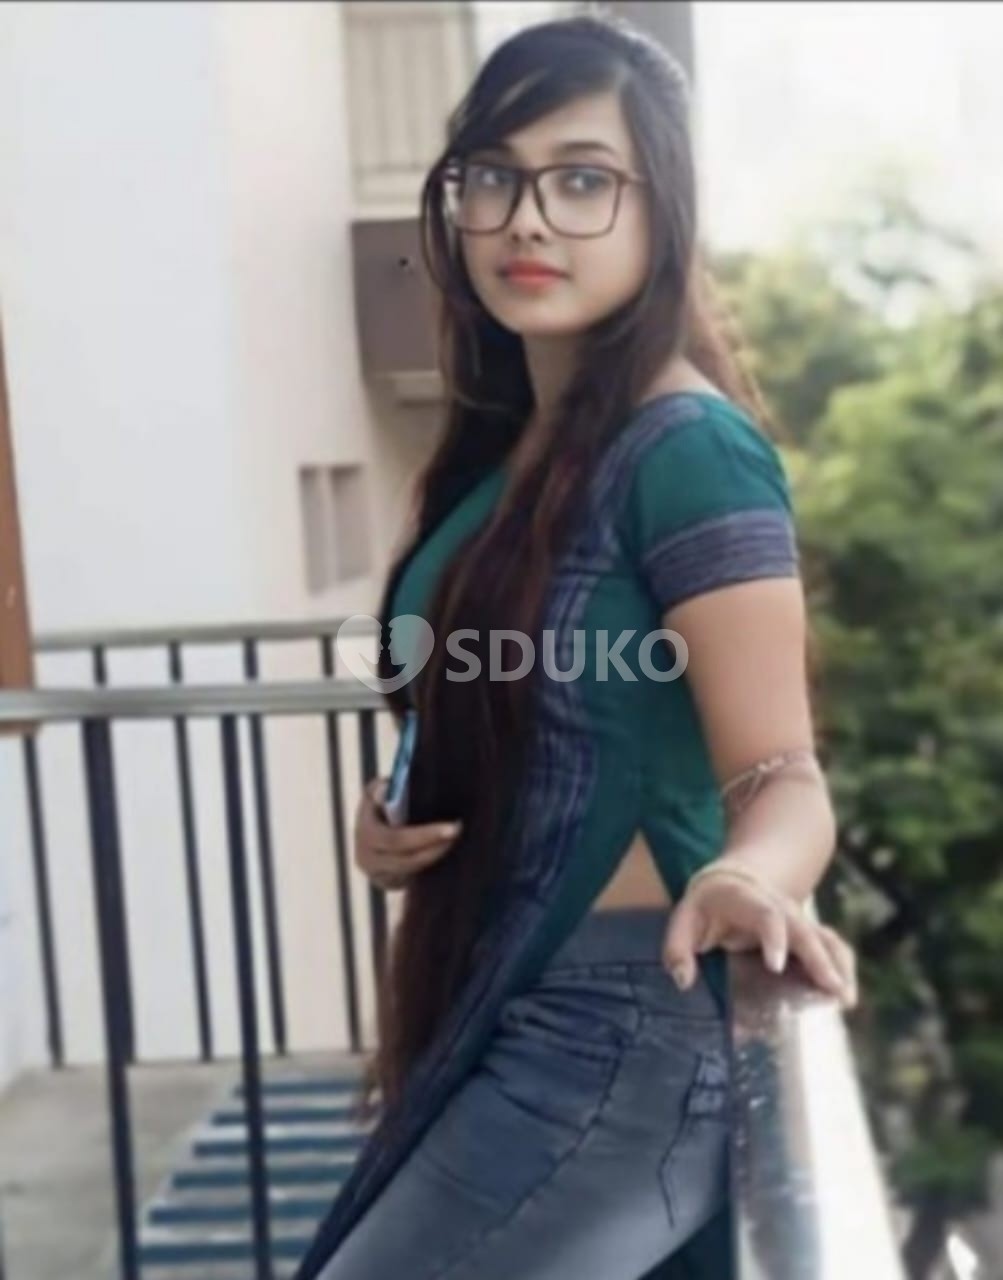 NELLORE 💙🔥.,,TODAY LOW PRICE 💯 SAFE AND SECURE SERVICE INCALL OUTCALL AVAILABLE CALL ME